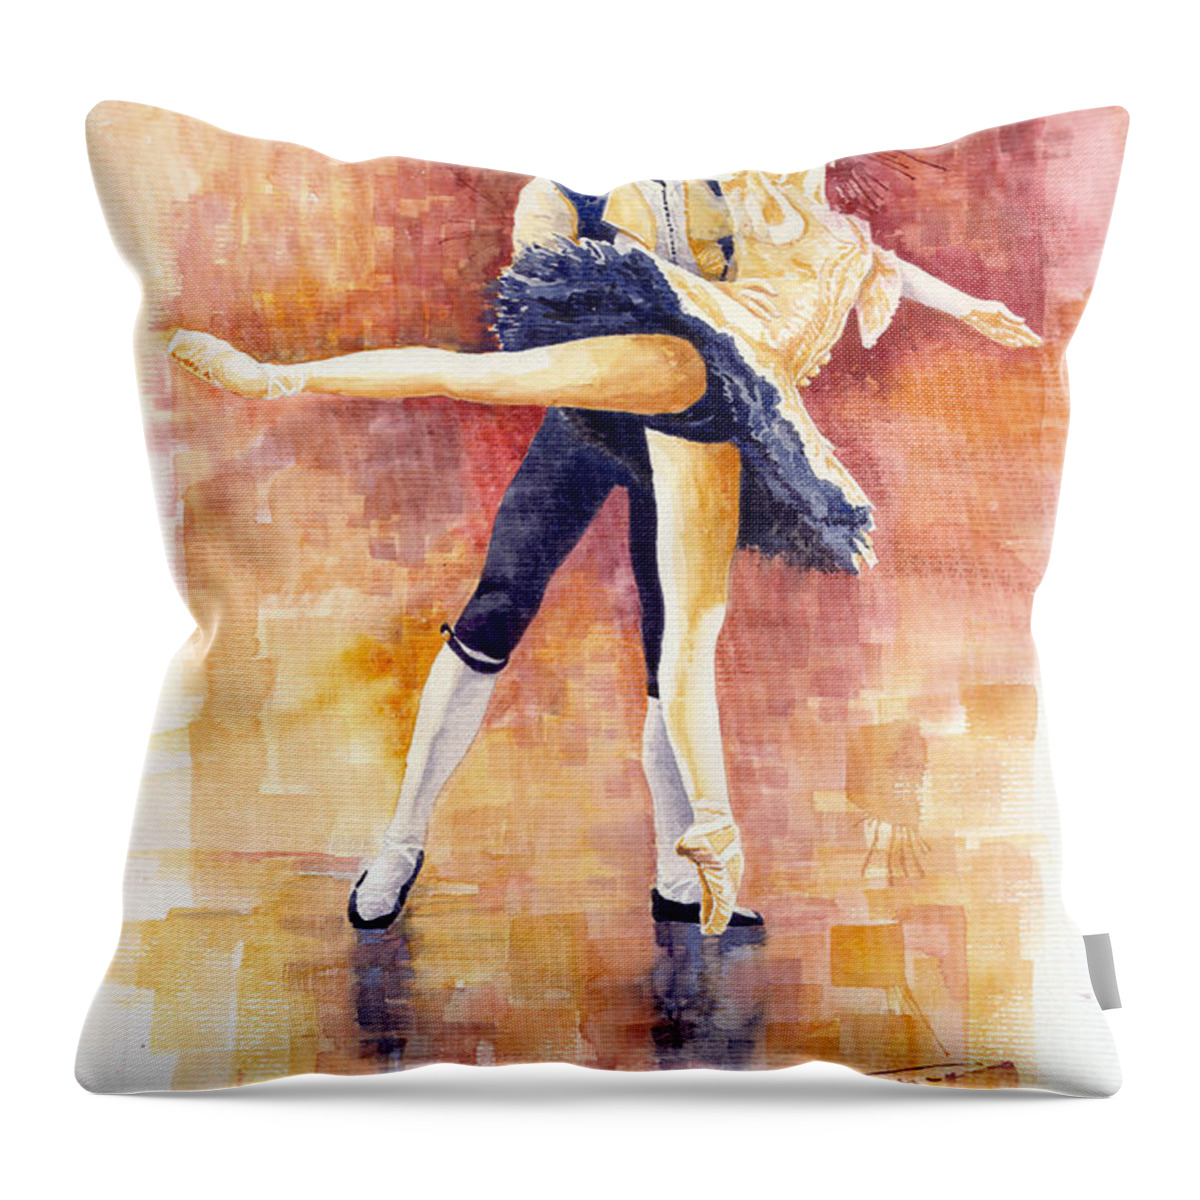 Watercolour Throw Pillow featuring the painting Balet 01 by Yuriy Shevchuk